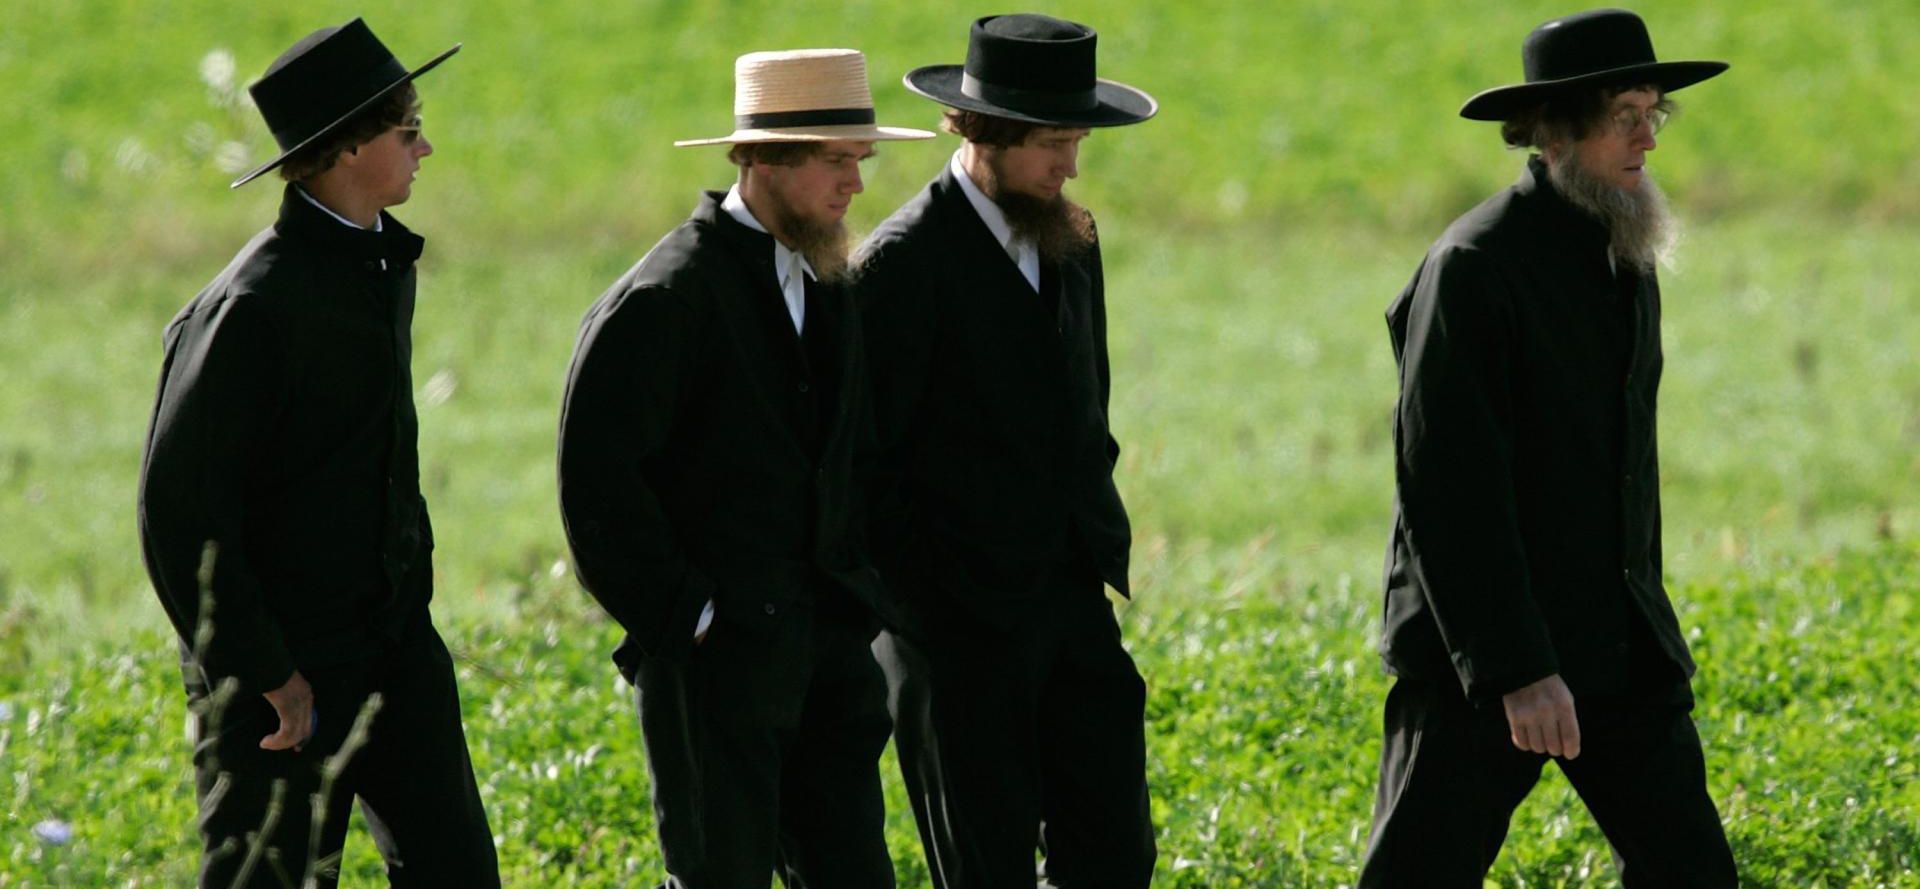 Amish singles men in the field.